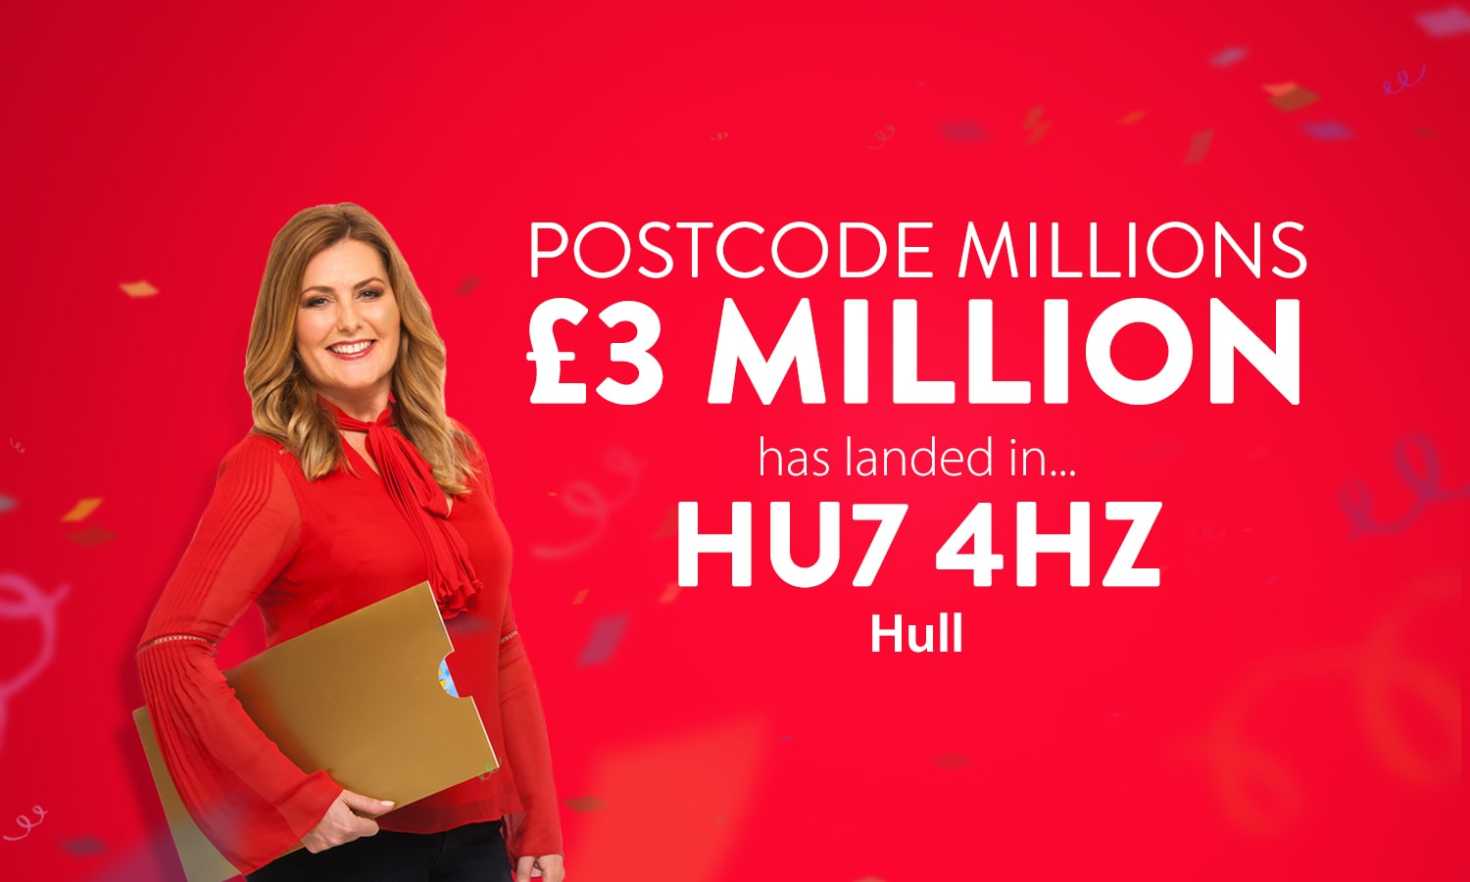 £3 Million in prizes is being shared between all the players in the winning postcode sector HU7 4